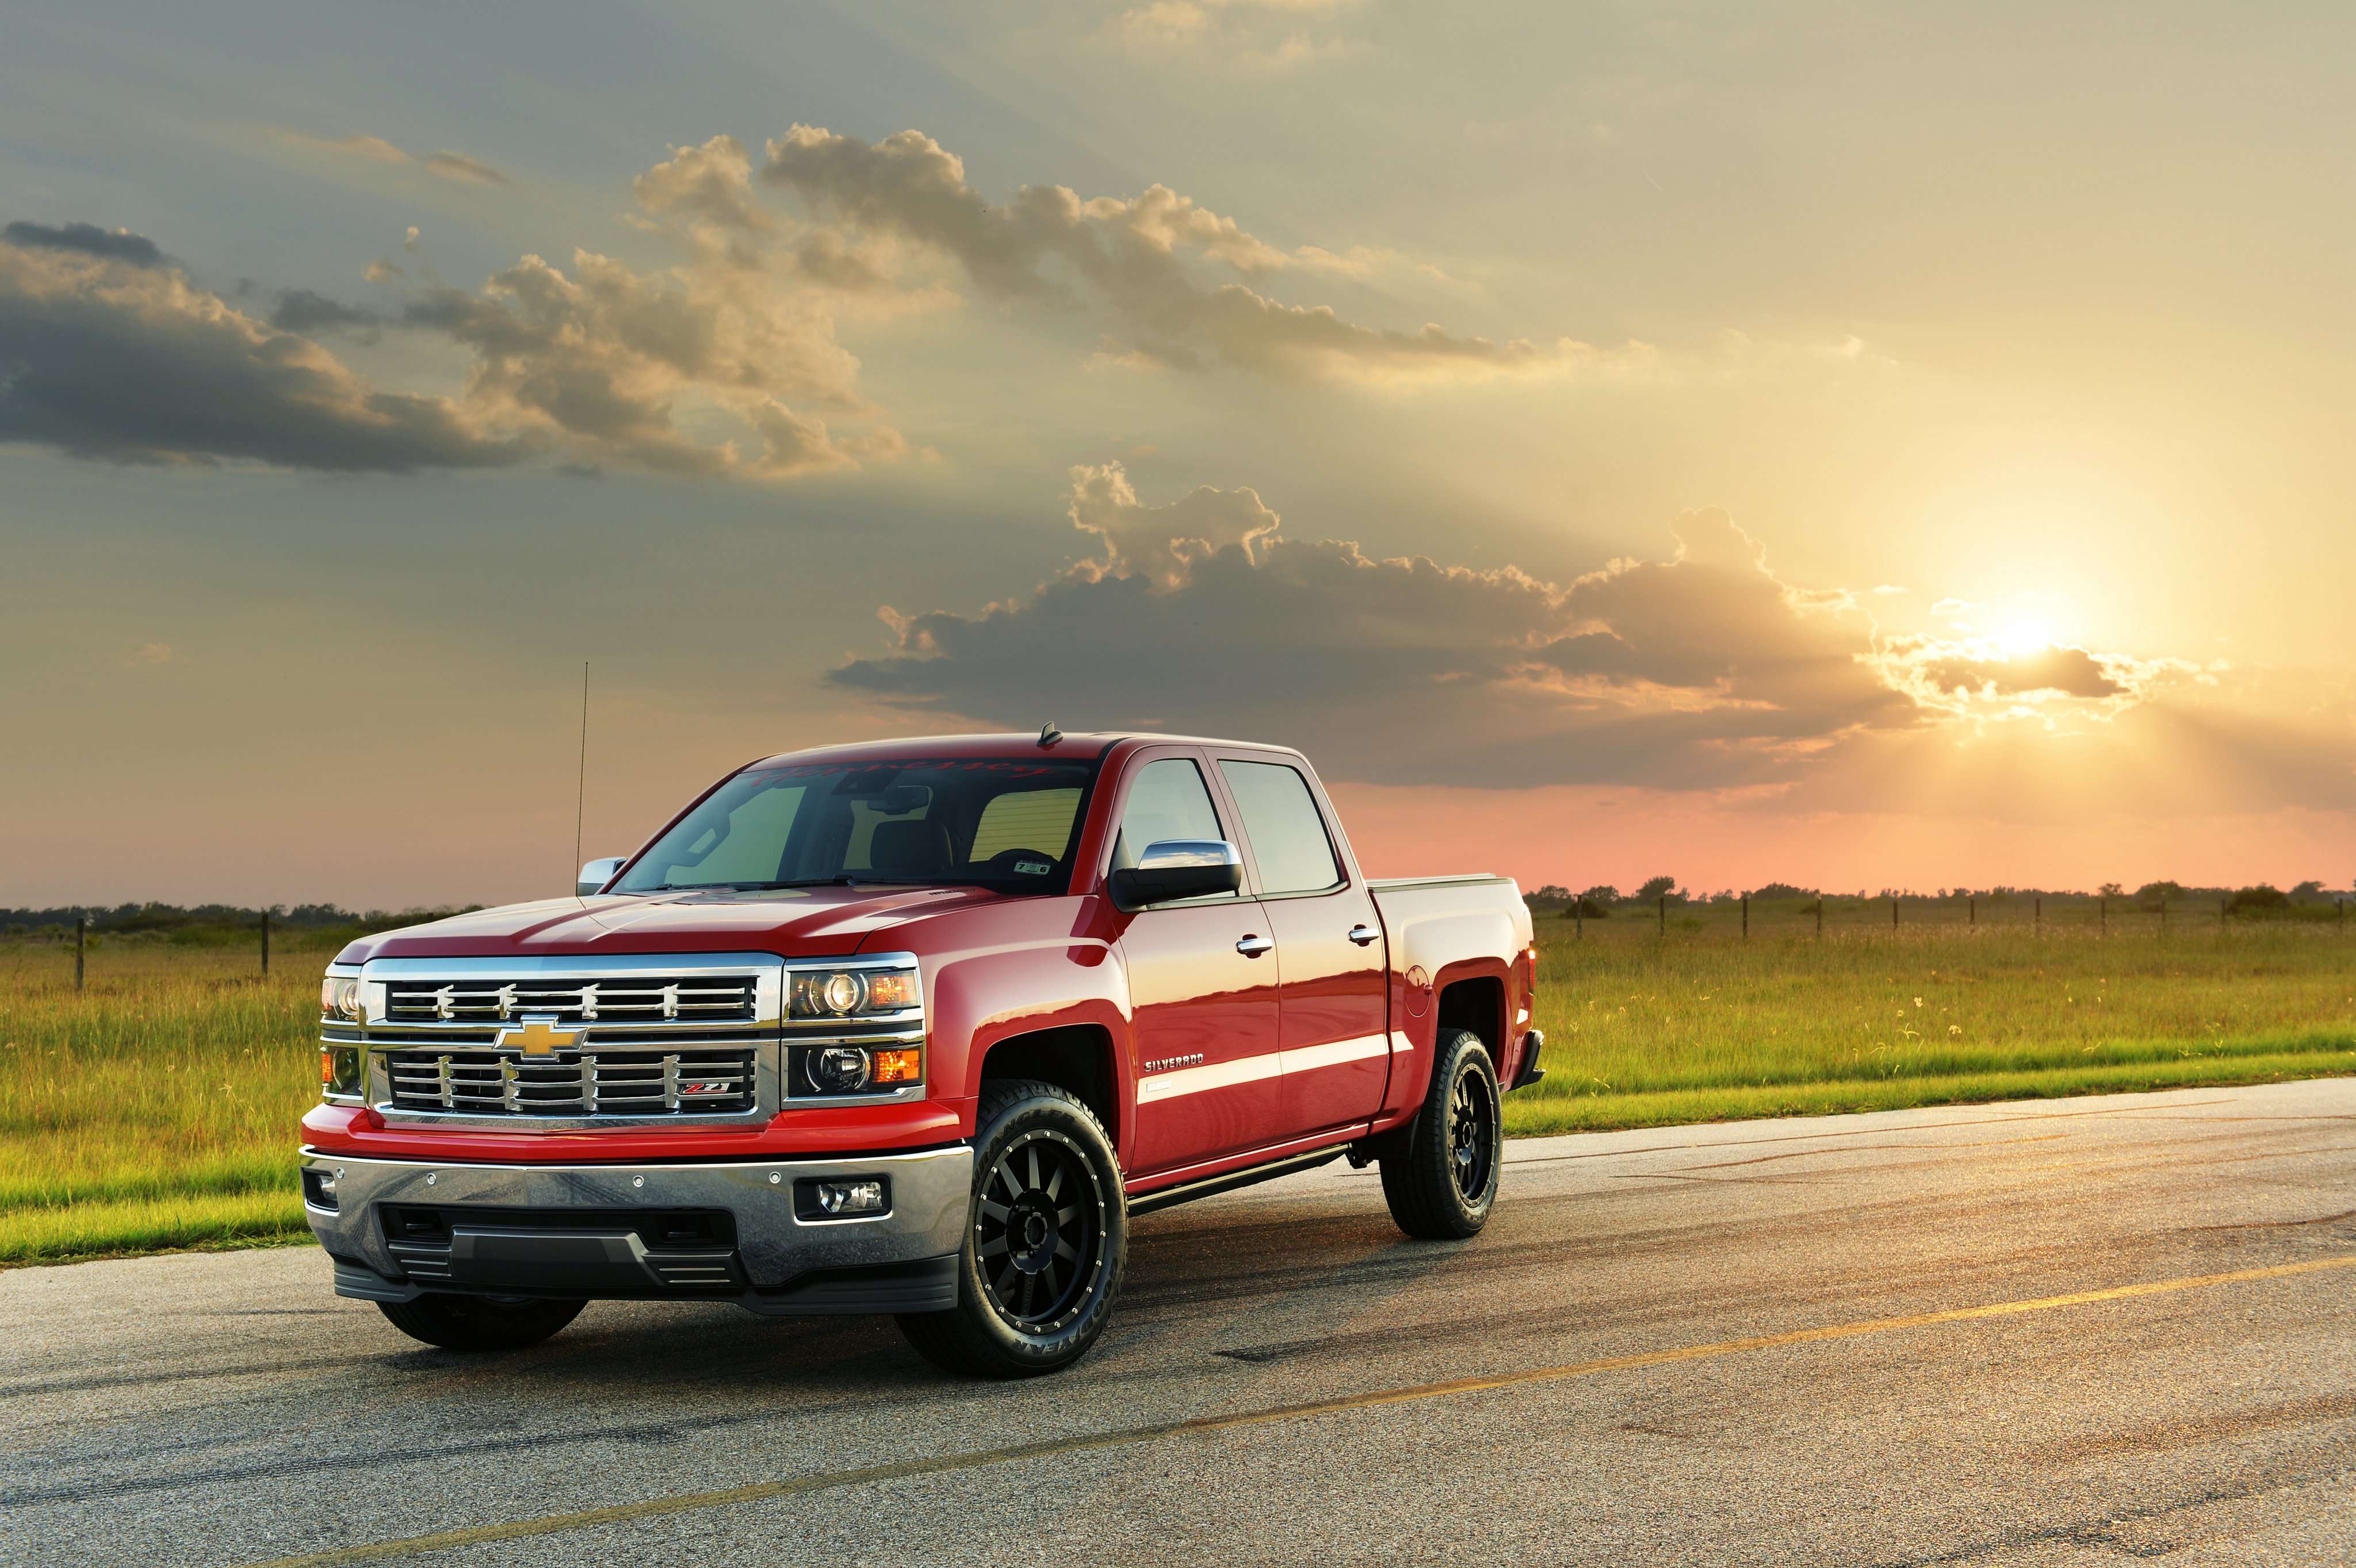 2015, Hennessey, Chevrolet, Silverado, Z71, Hpe550, Pickup, Muscle, Tuning Wallpaper